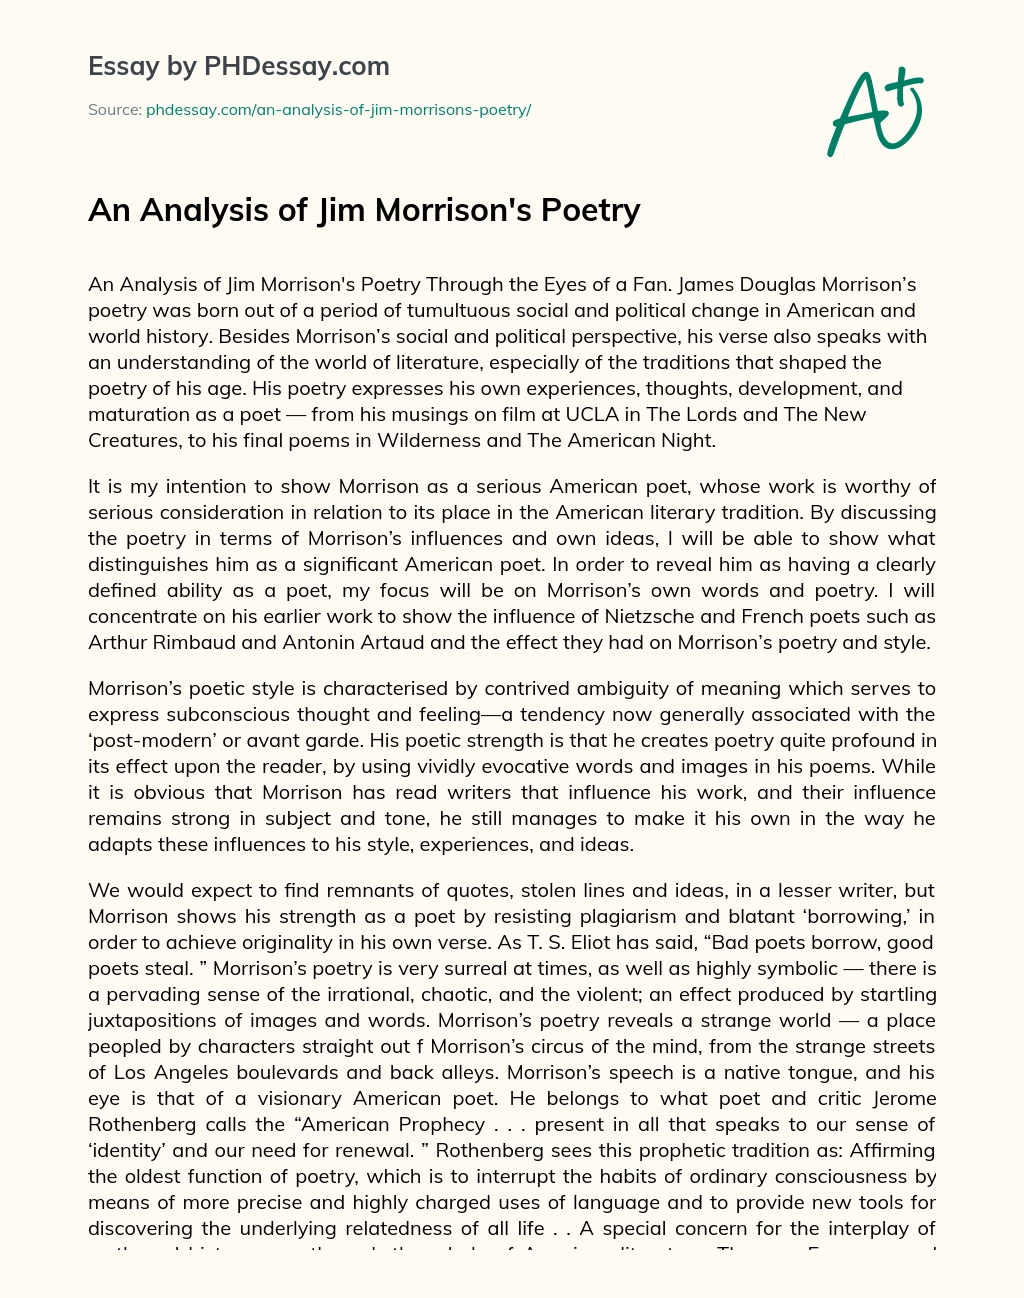 An Analysis Of Jim Morrison S Poetry Phdessay Com